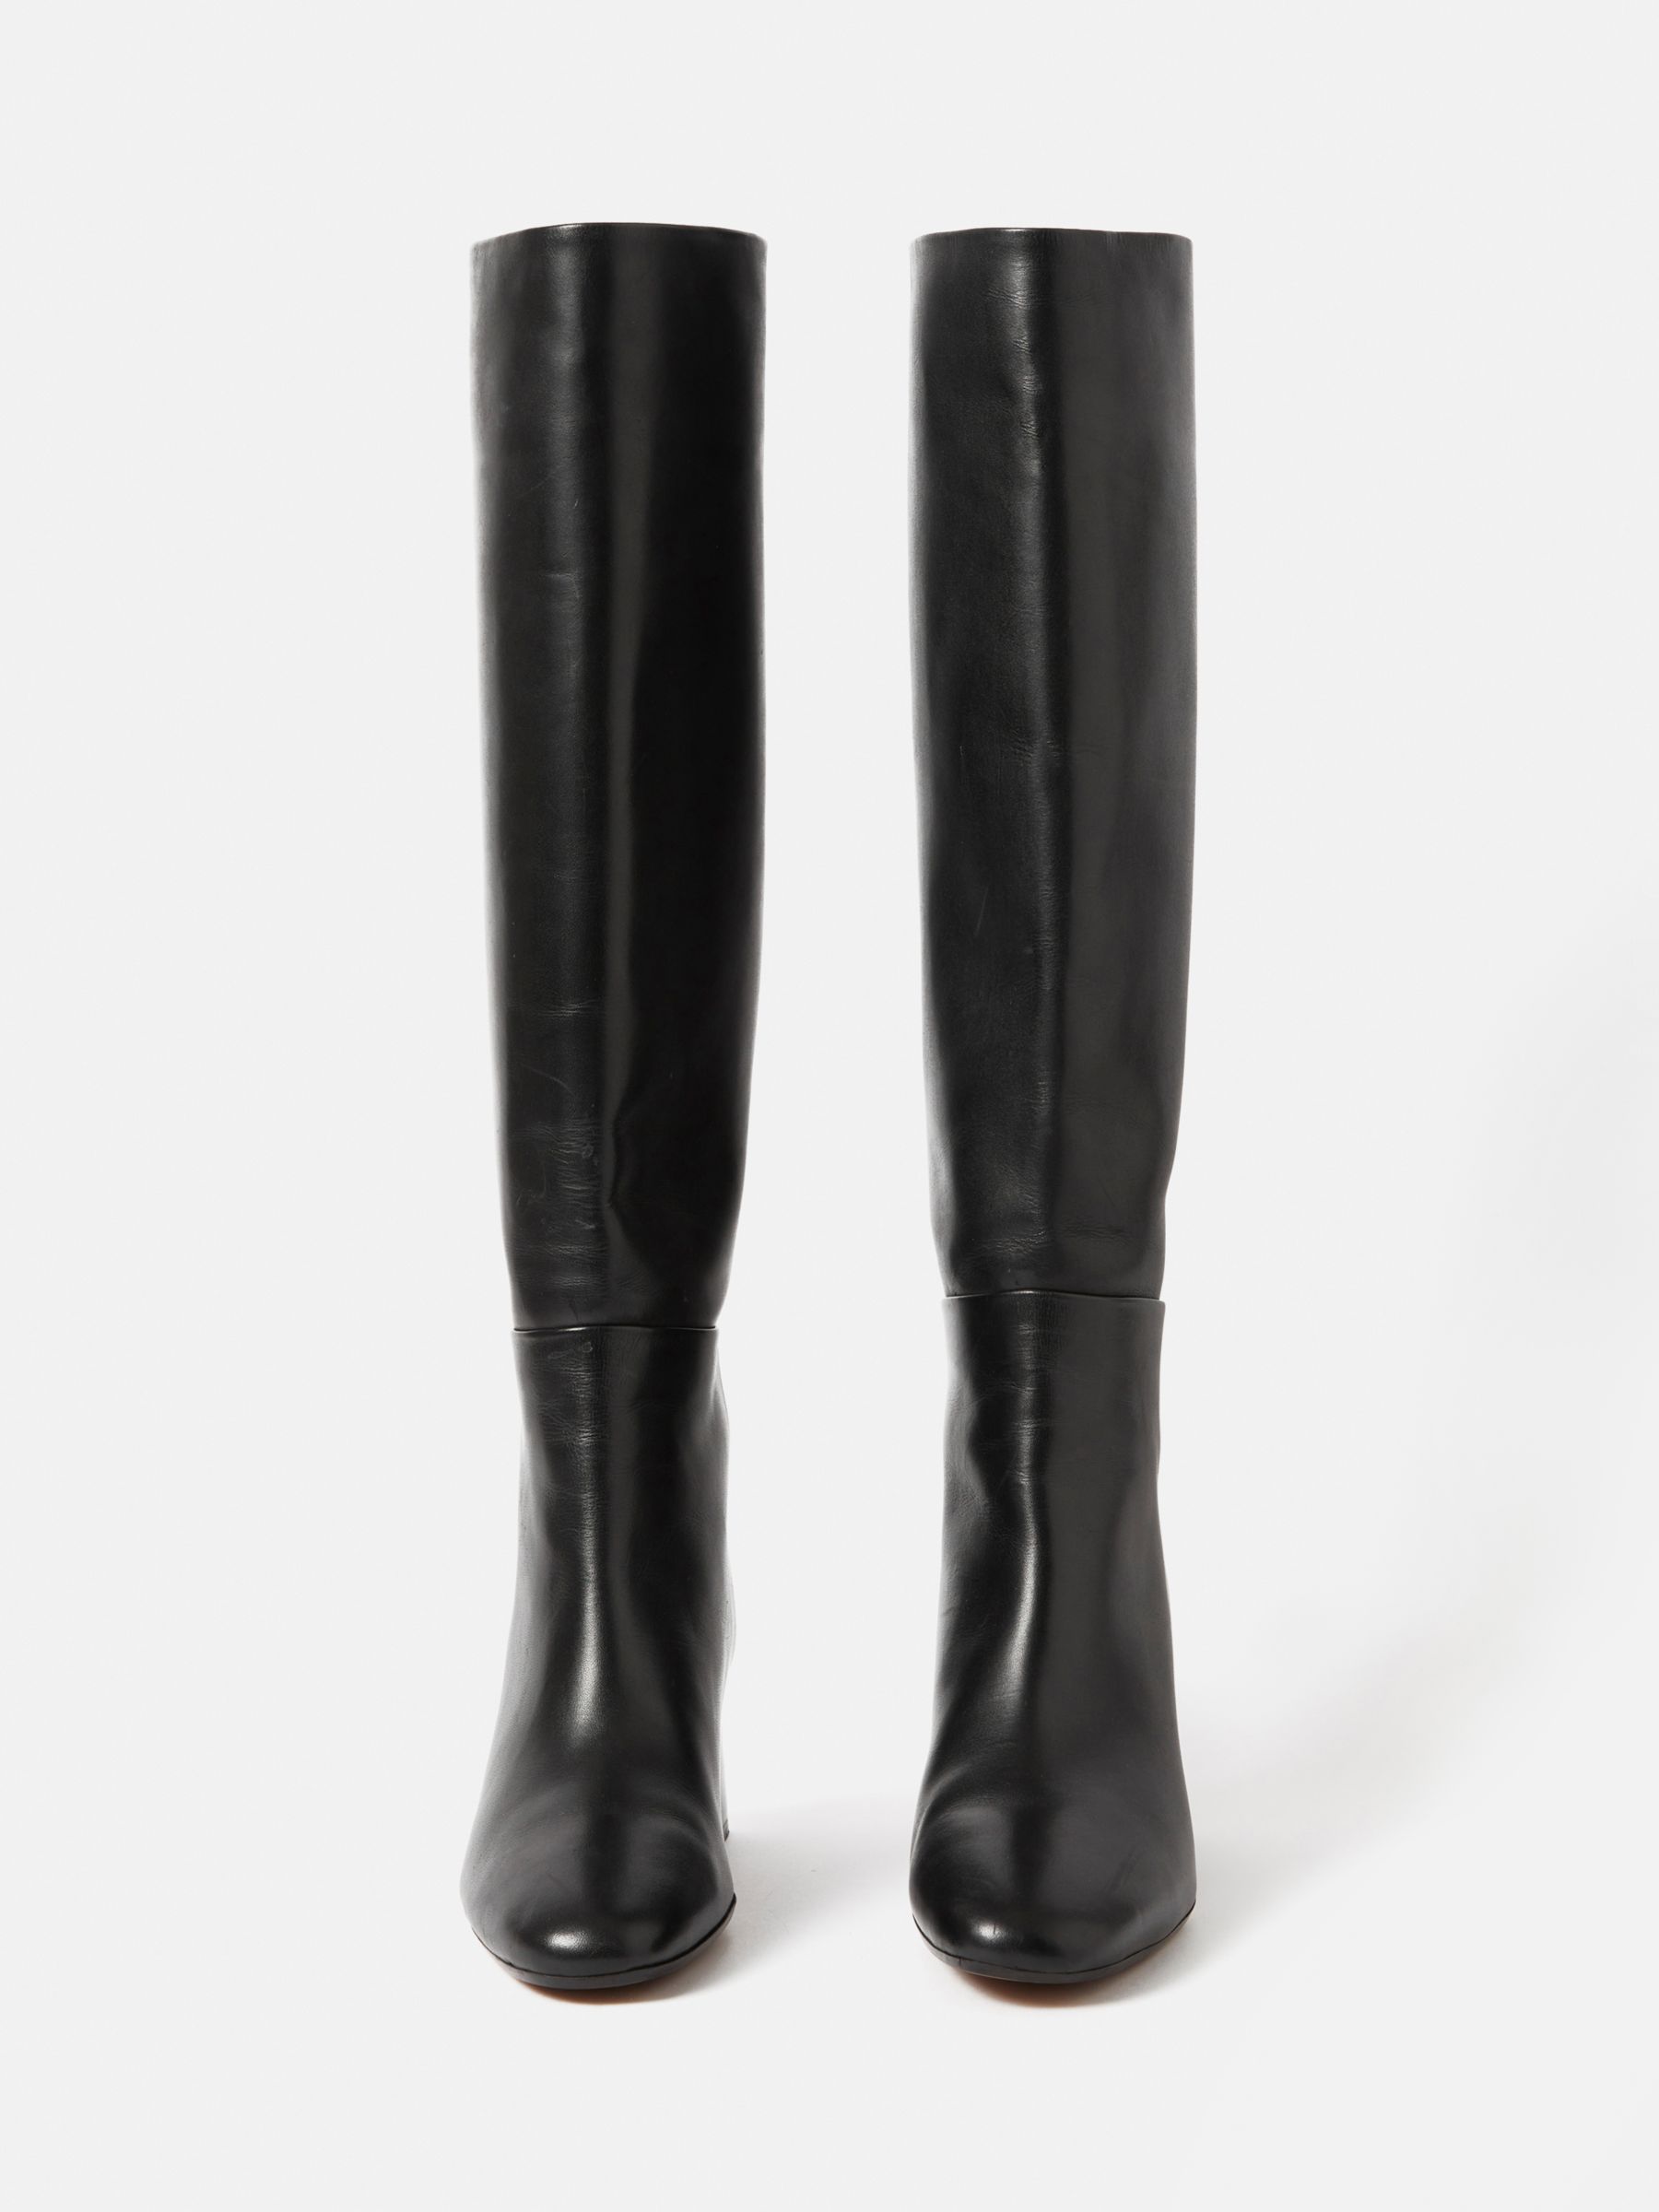 black trousers wearing black leather knee length riding boots - Playground